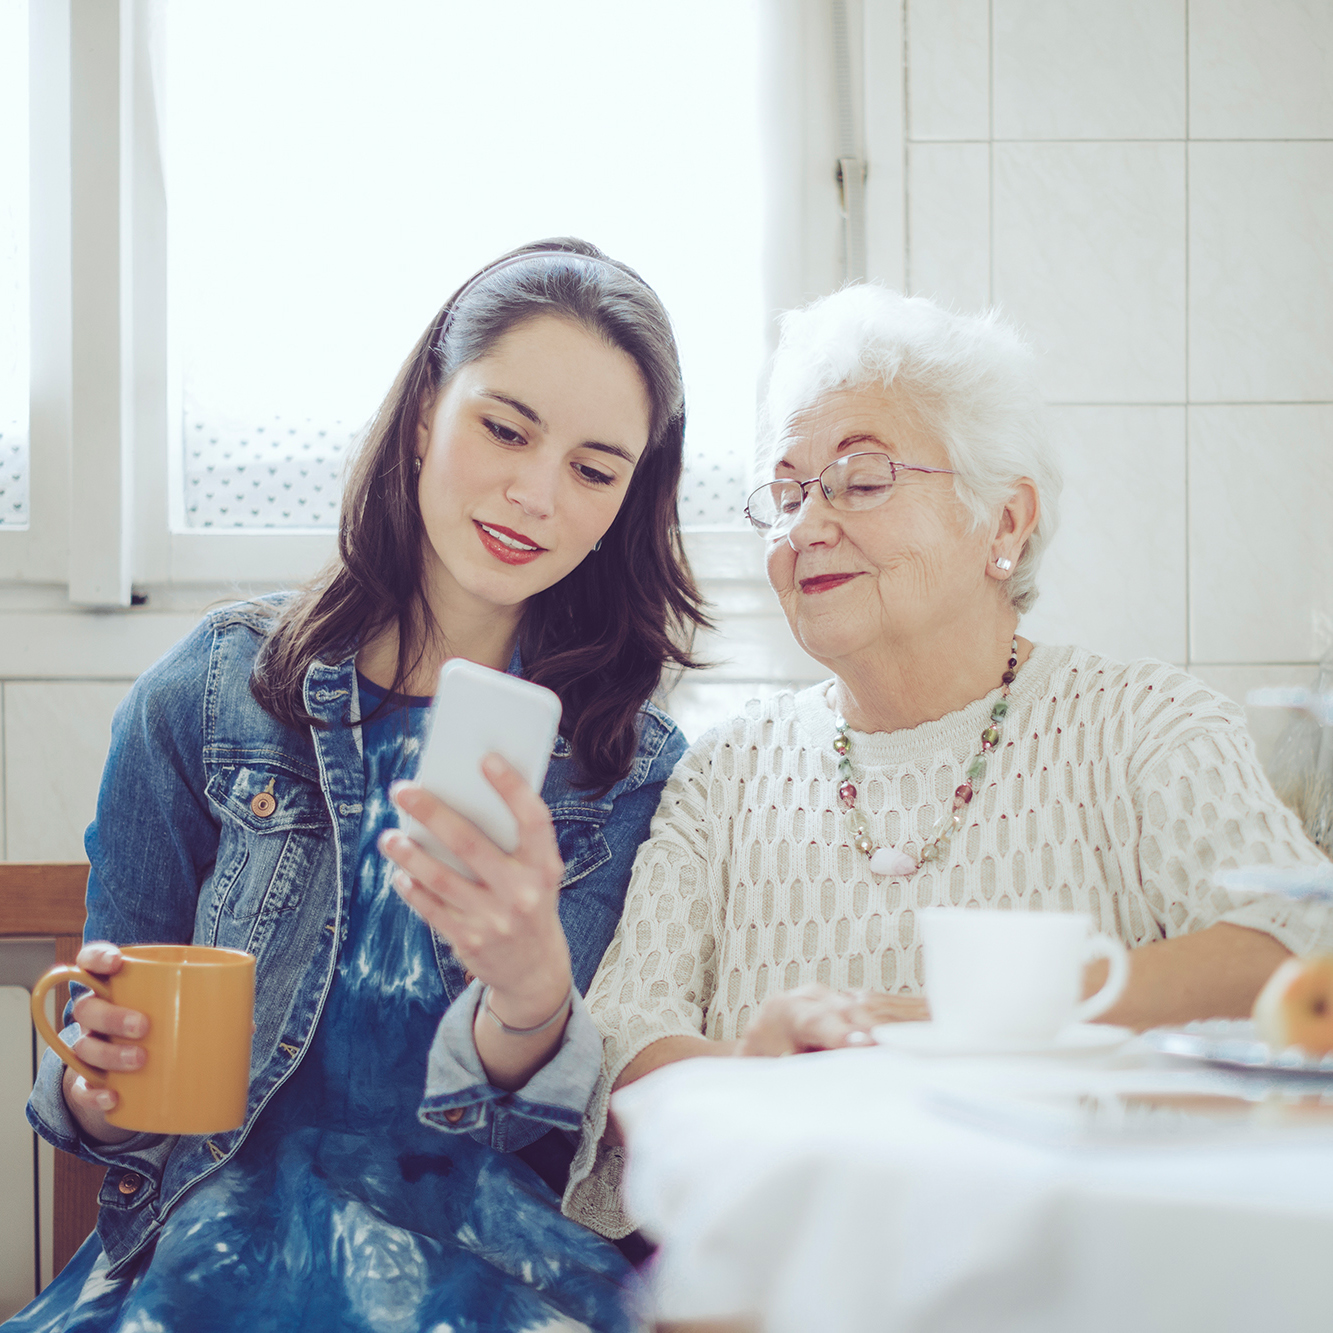 A young woman with an older women checking a cell phone.